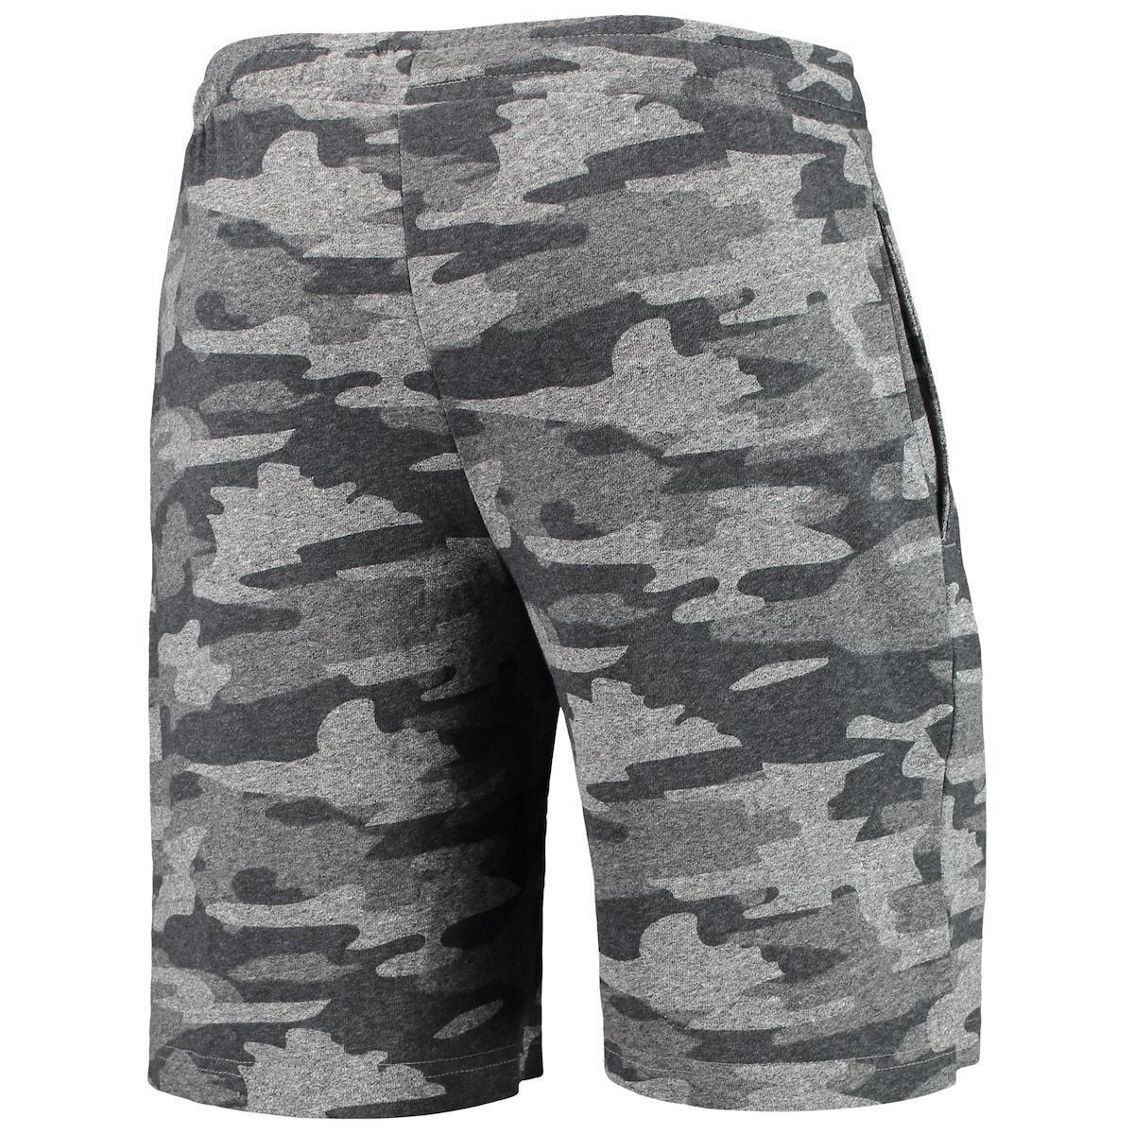 Concepts Sport Men's Charcoal/Gray Purdue Boilermakers Camo Backup Terry Jam Lounge Shorts - Image 4 of 4